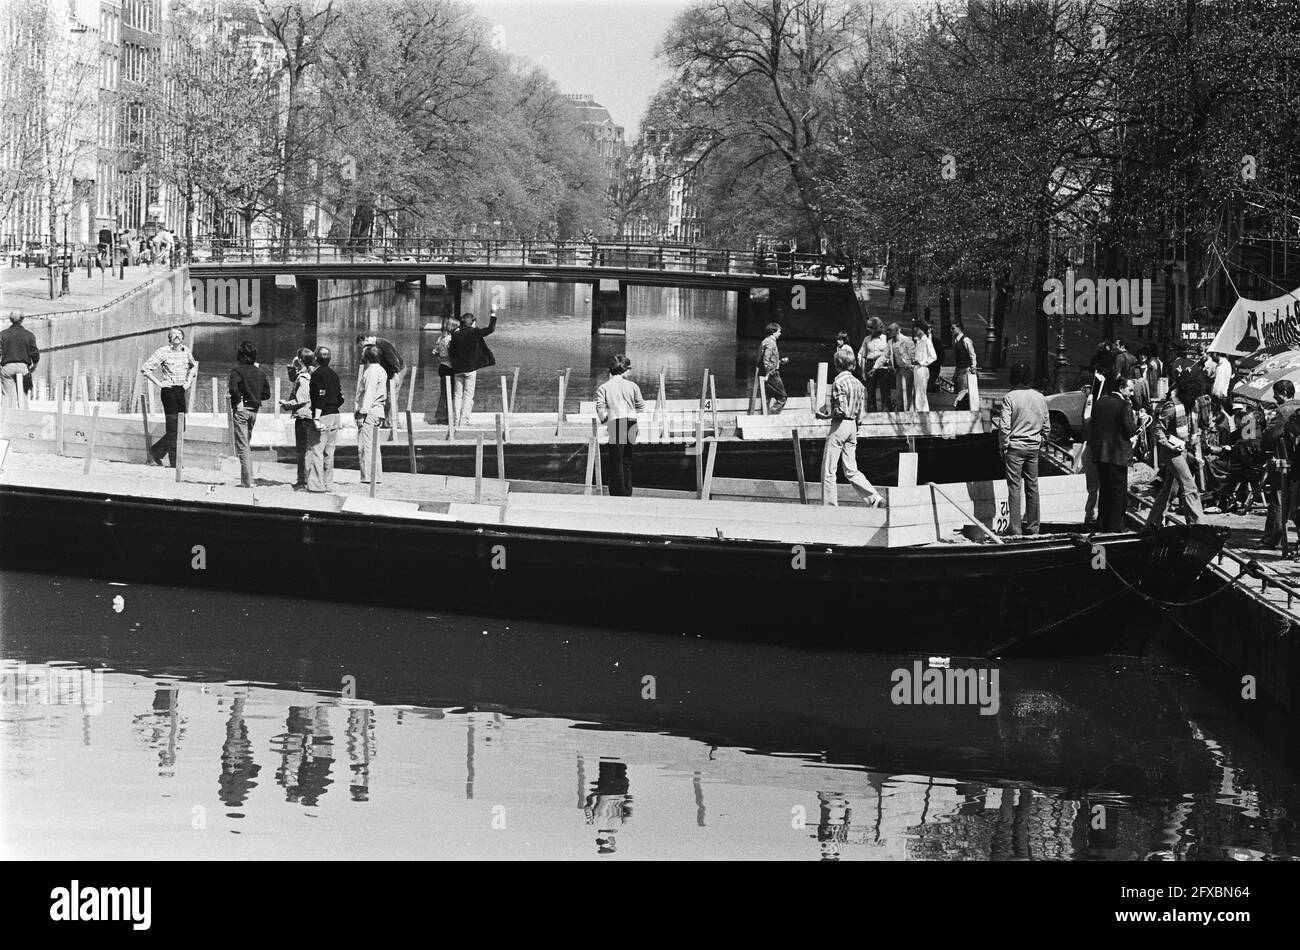 Boules for the canal cup on two deck barges in Keizersgracht, April 29, 1978, The Netherlands, 20th century press agency photo, news to remember, documentary, historic photography 1945-1990, visual stories, human history of the Twentieth Century, capturing moments in time Stock Photo